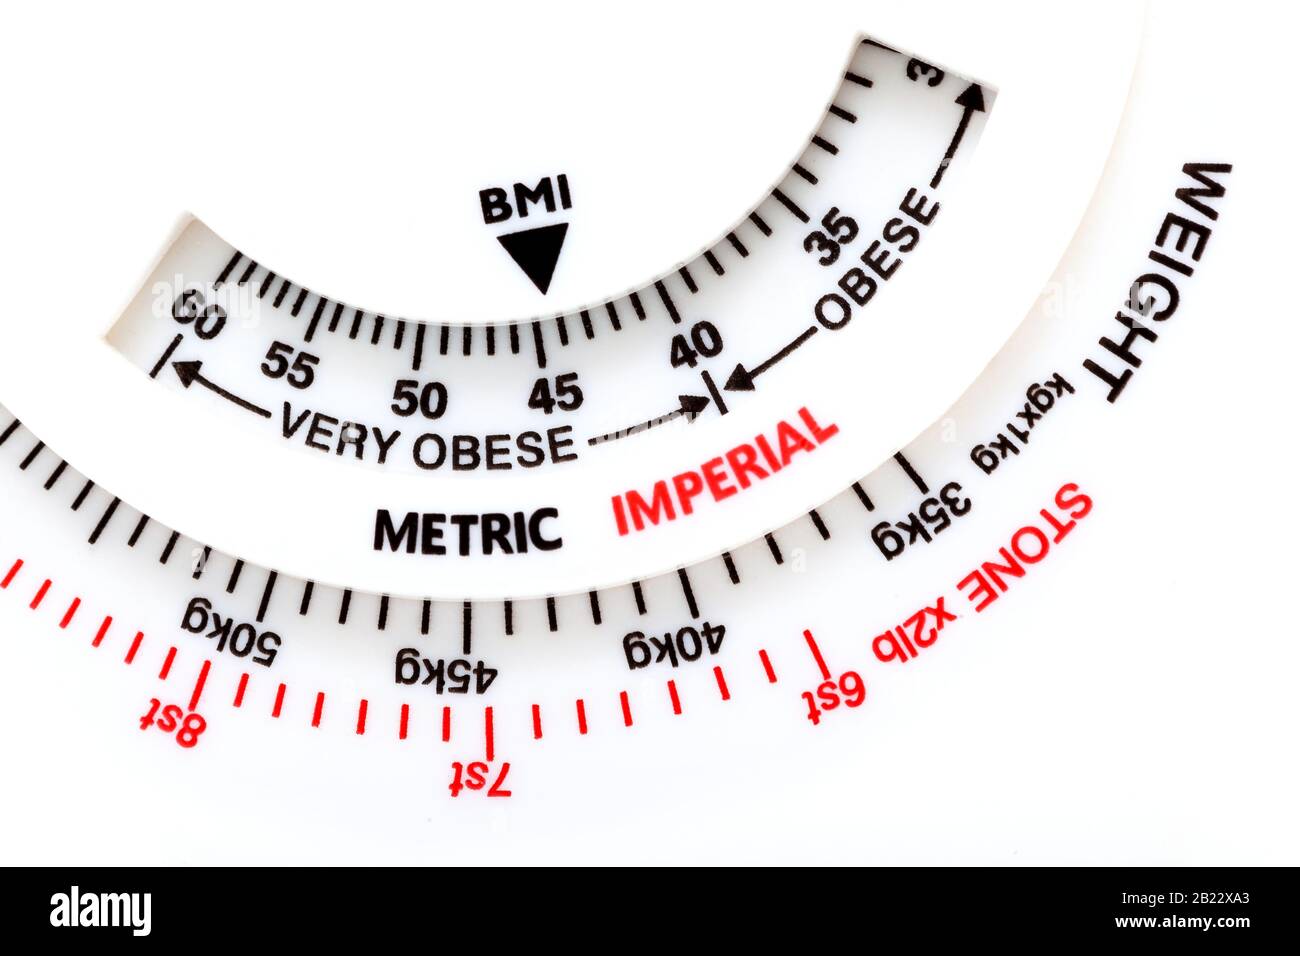 https://c8.alamy.com/comp/2B22XA3/simple-bmi-body-mass-index-calculator-meter-tool-weight-measurement-obesity-problem-abstract-measuring-weight-and-calculating-bmi-arrow-pointing-at-2B22XA3.jpg